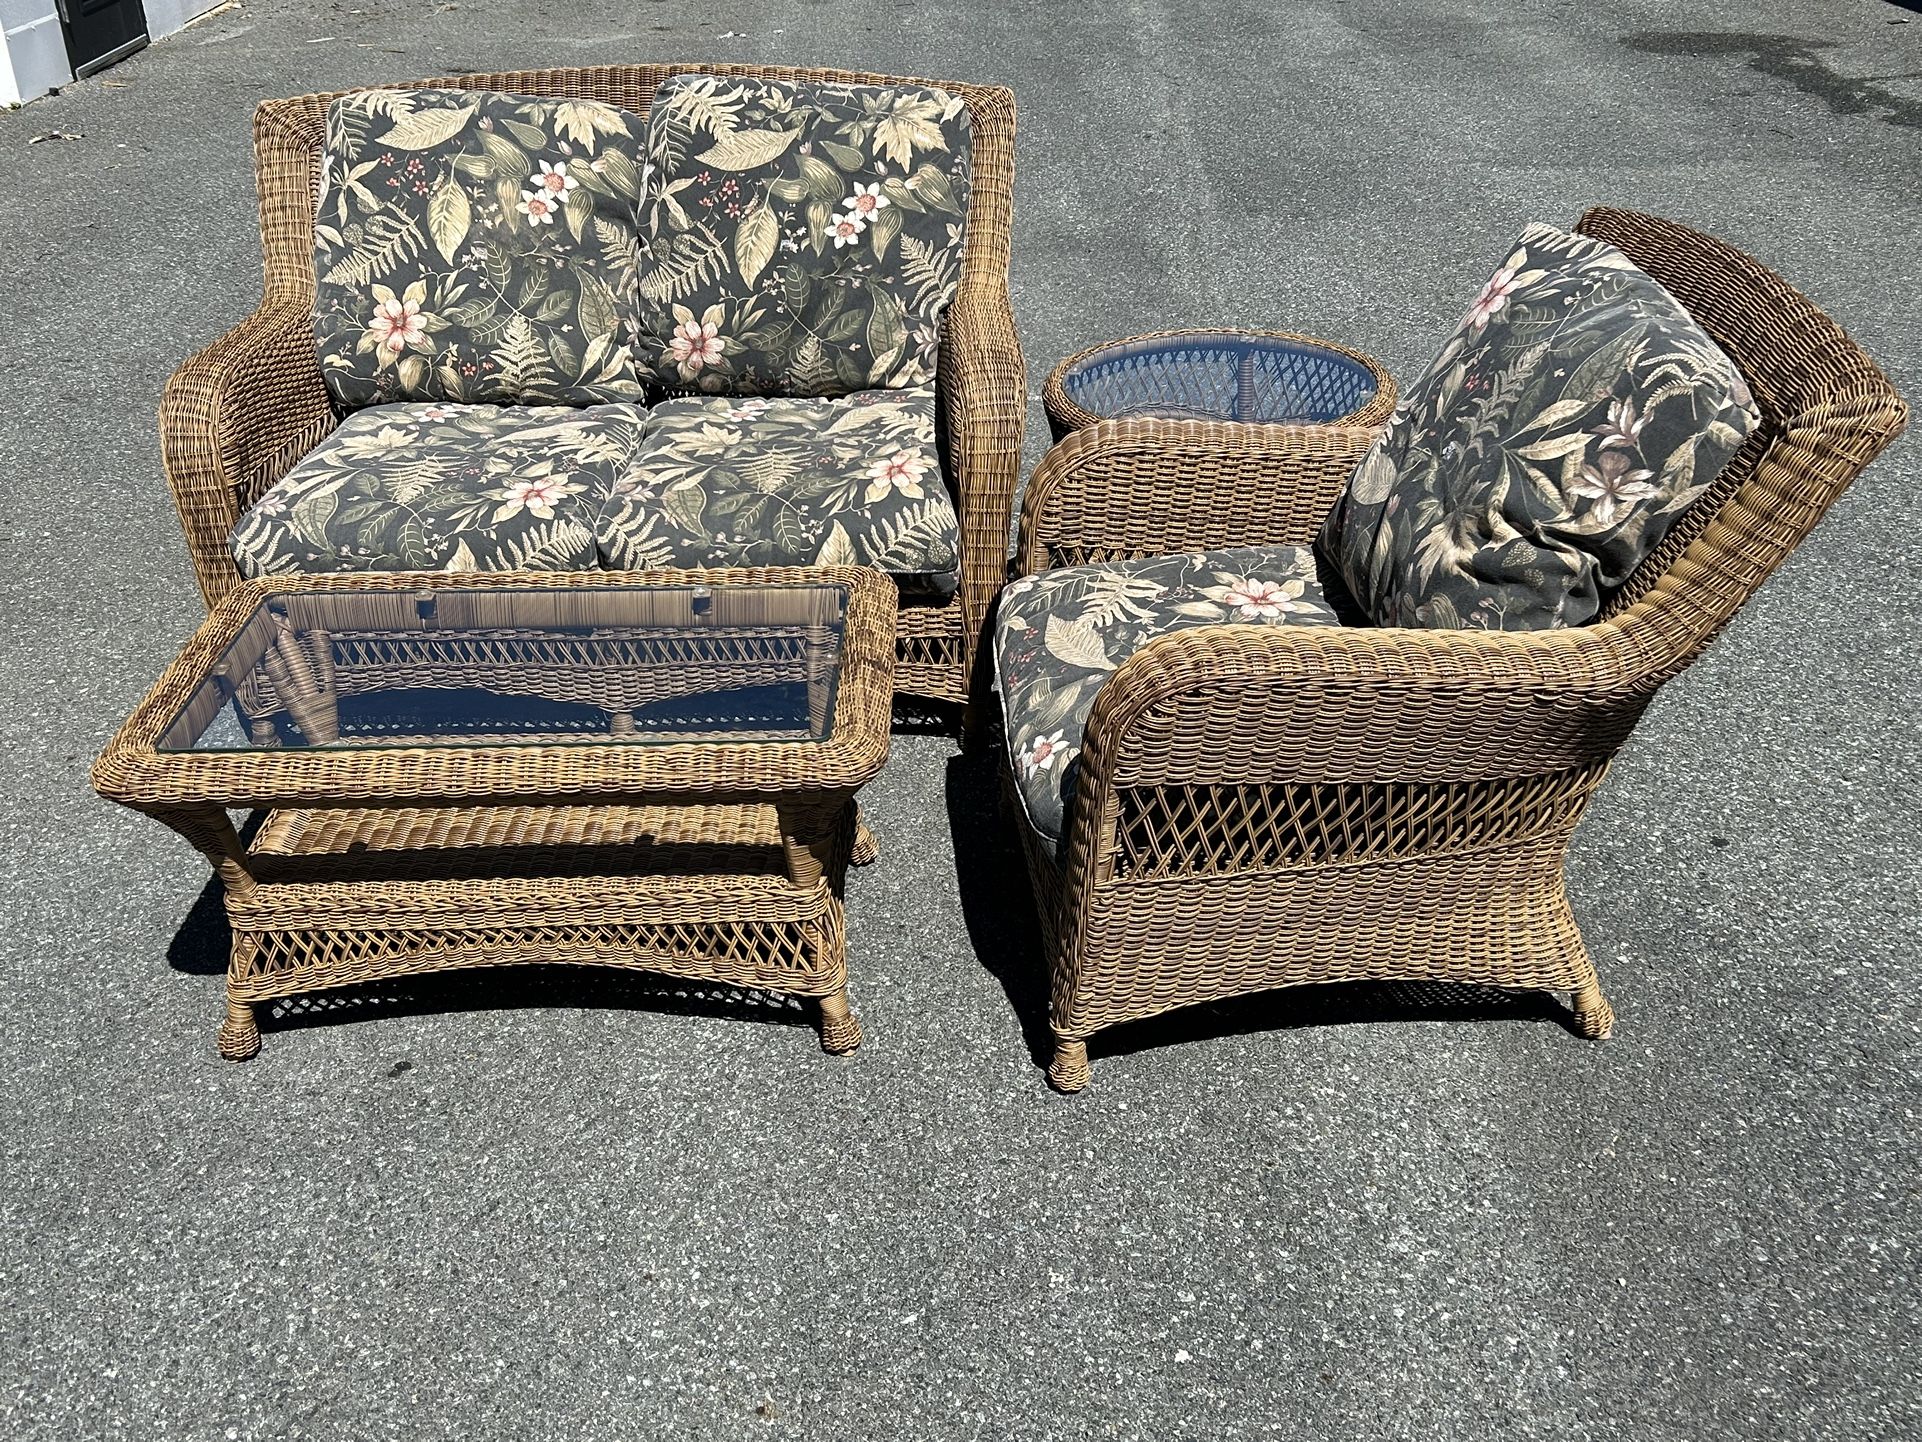 Beautiful 5 Piece Rattan Set Couch,Chair,Coffee Table, Side Table, Ottoman ***